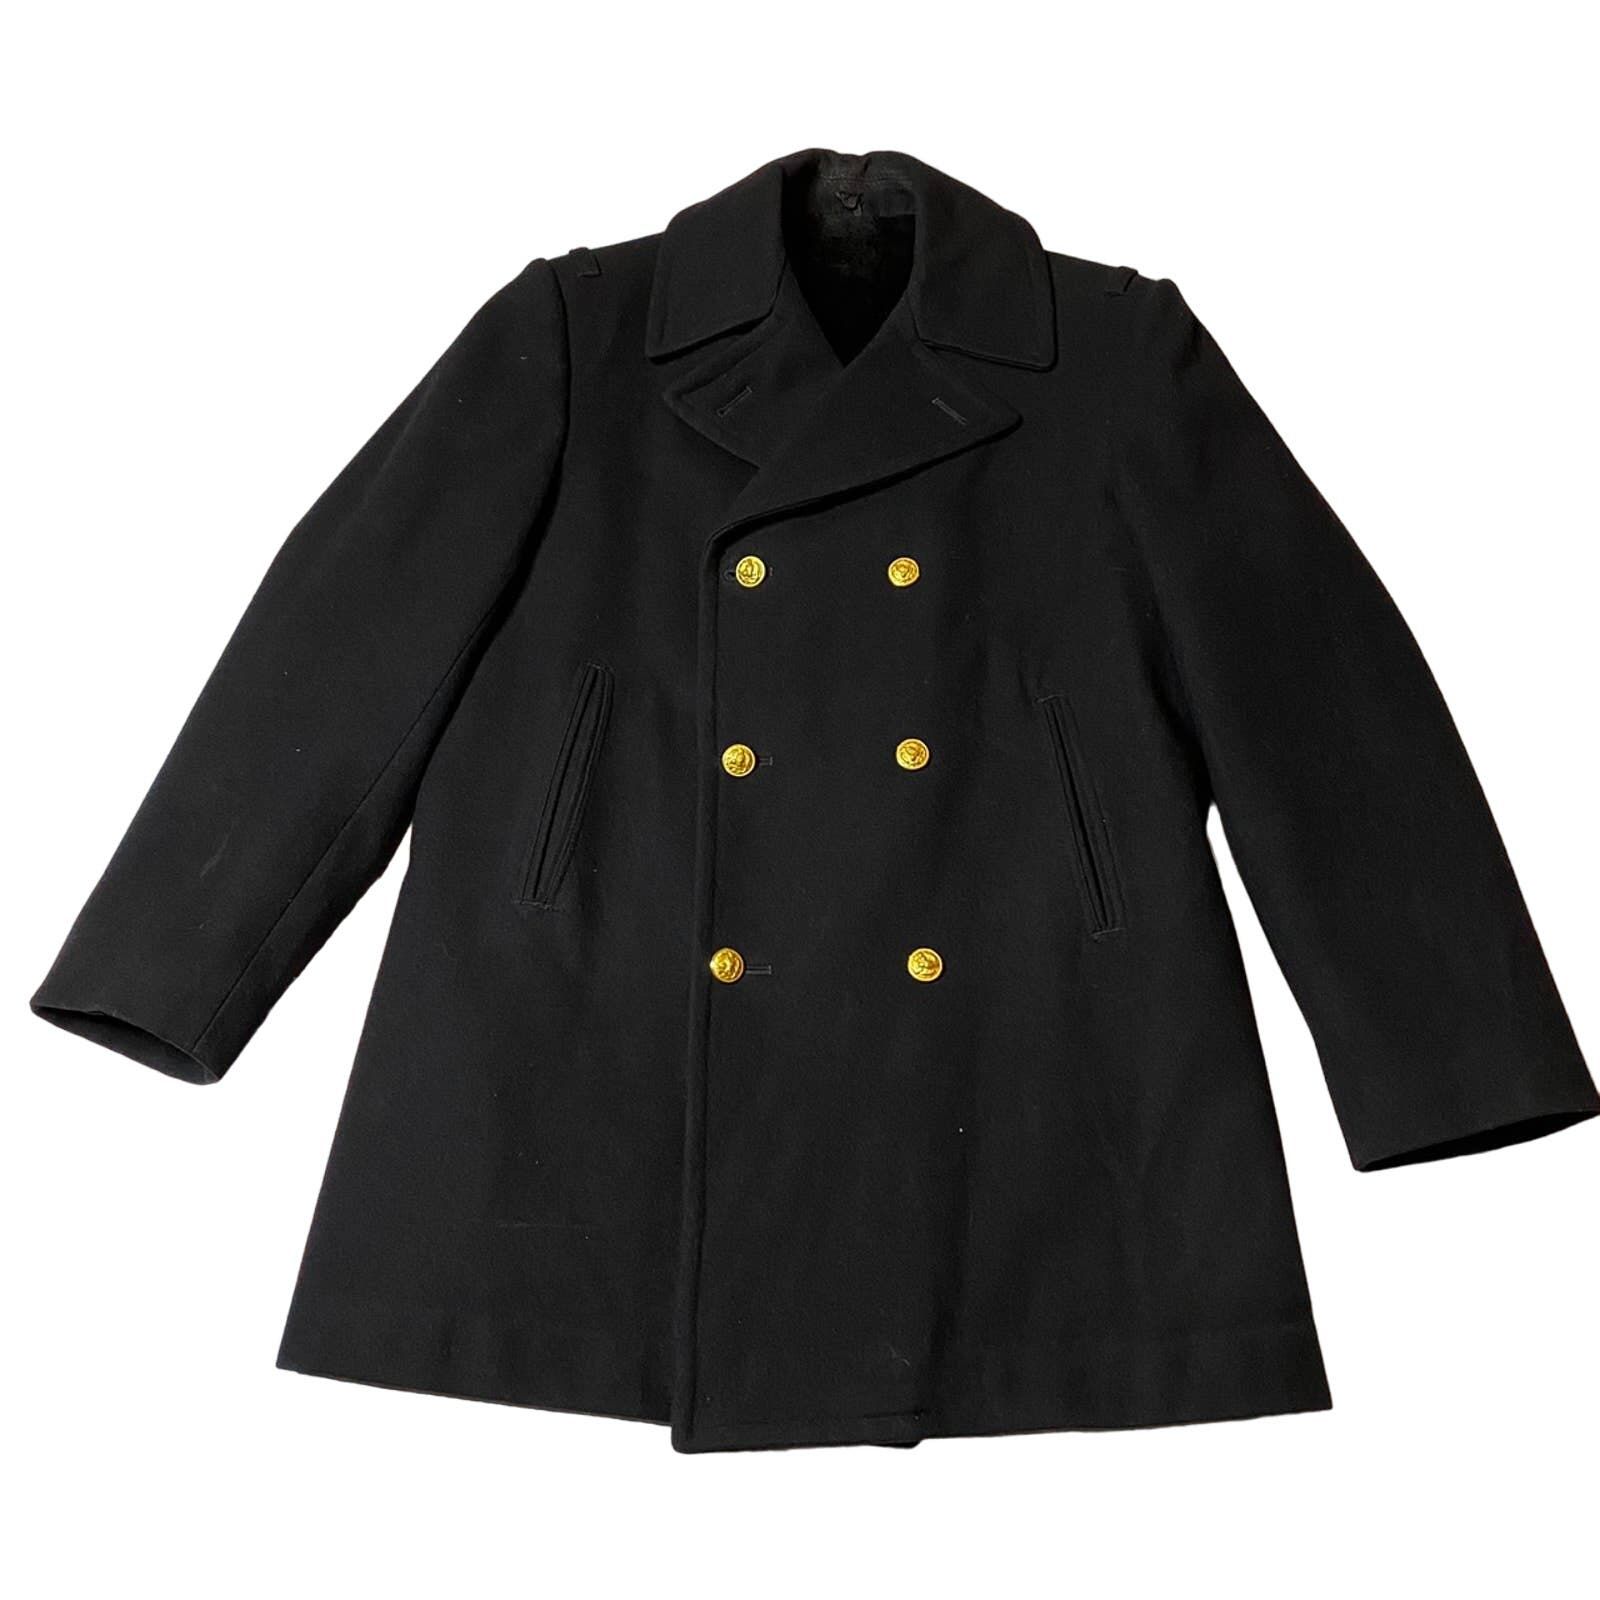 Other Neptune Garment Co Black Wool Military Pea Coat Size Small Size US S / EU 44-46 / 1 - 1 Preview